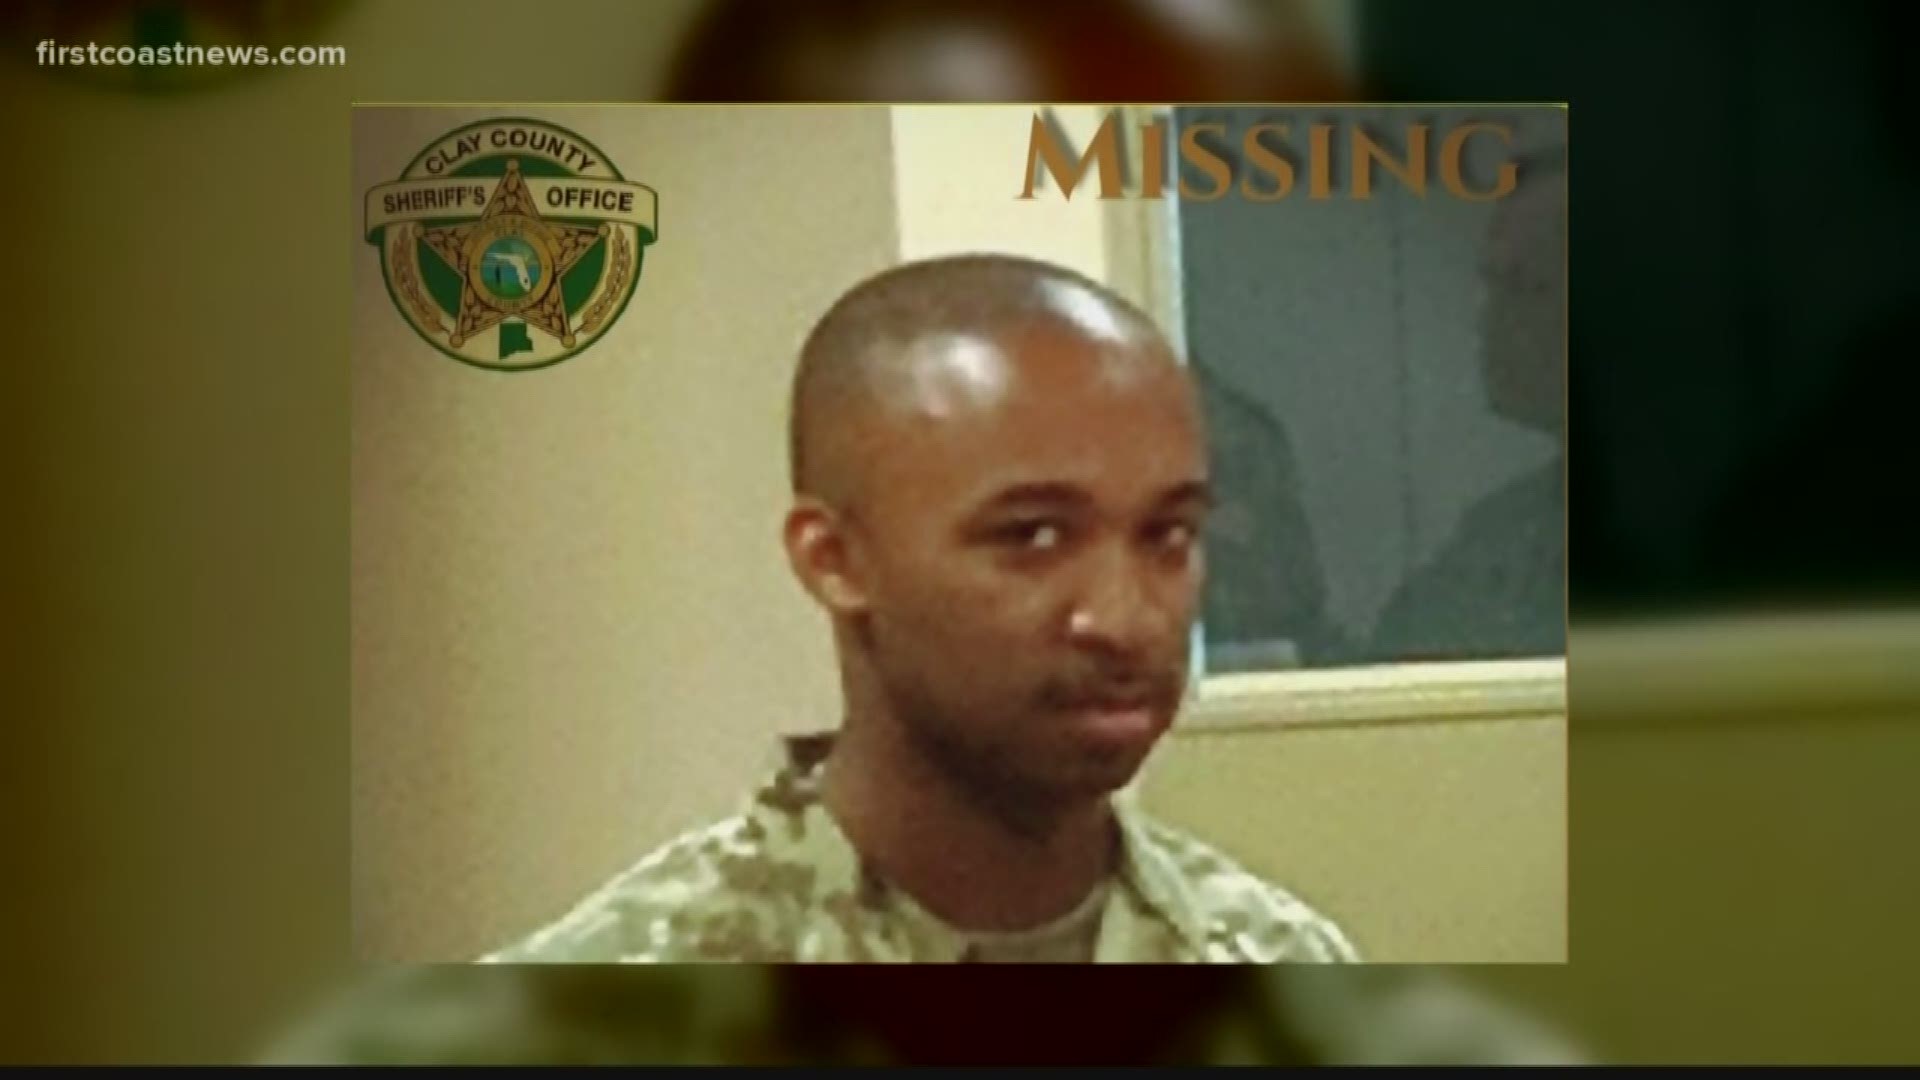 New personnel have joined the search for the soldier who went missing Wednesday during a training exercise in Camp Blanding.